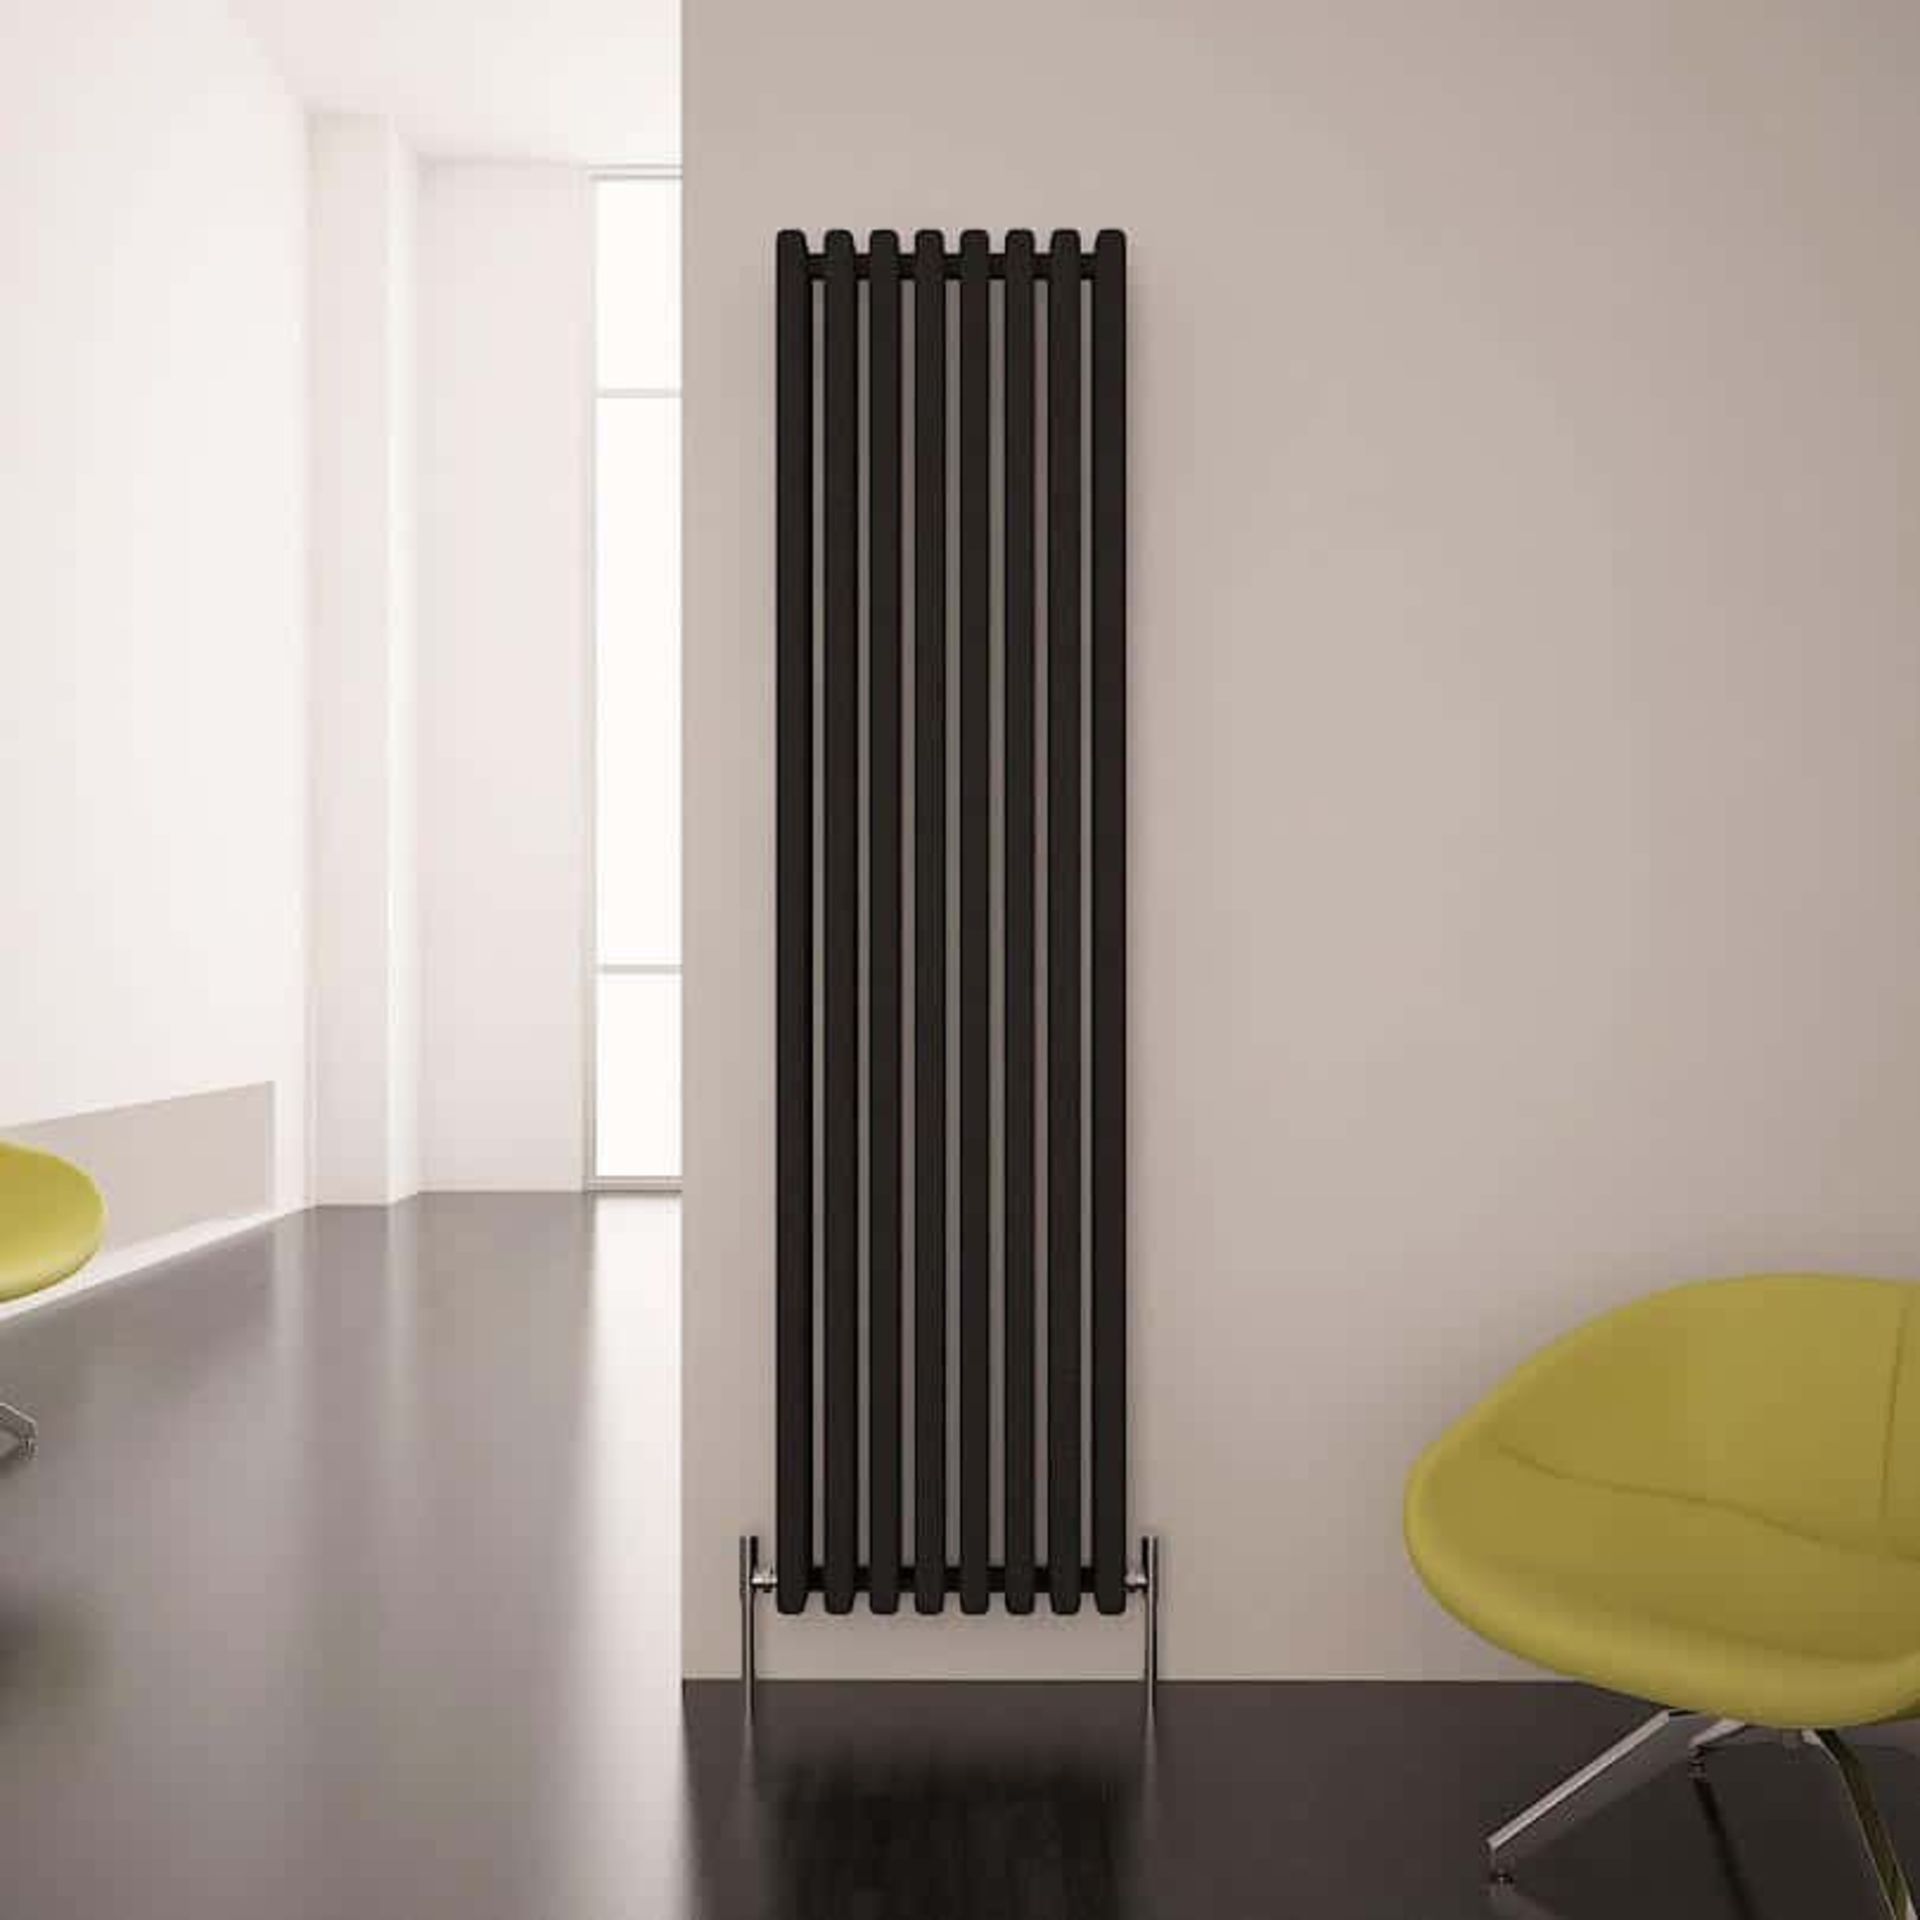 Carisa karo radiator, 1800x390mm, has wall brackets, appears to still be factory wrapped although